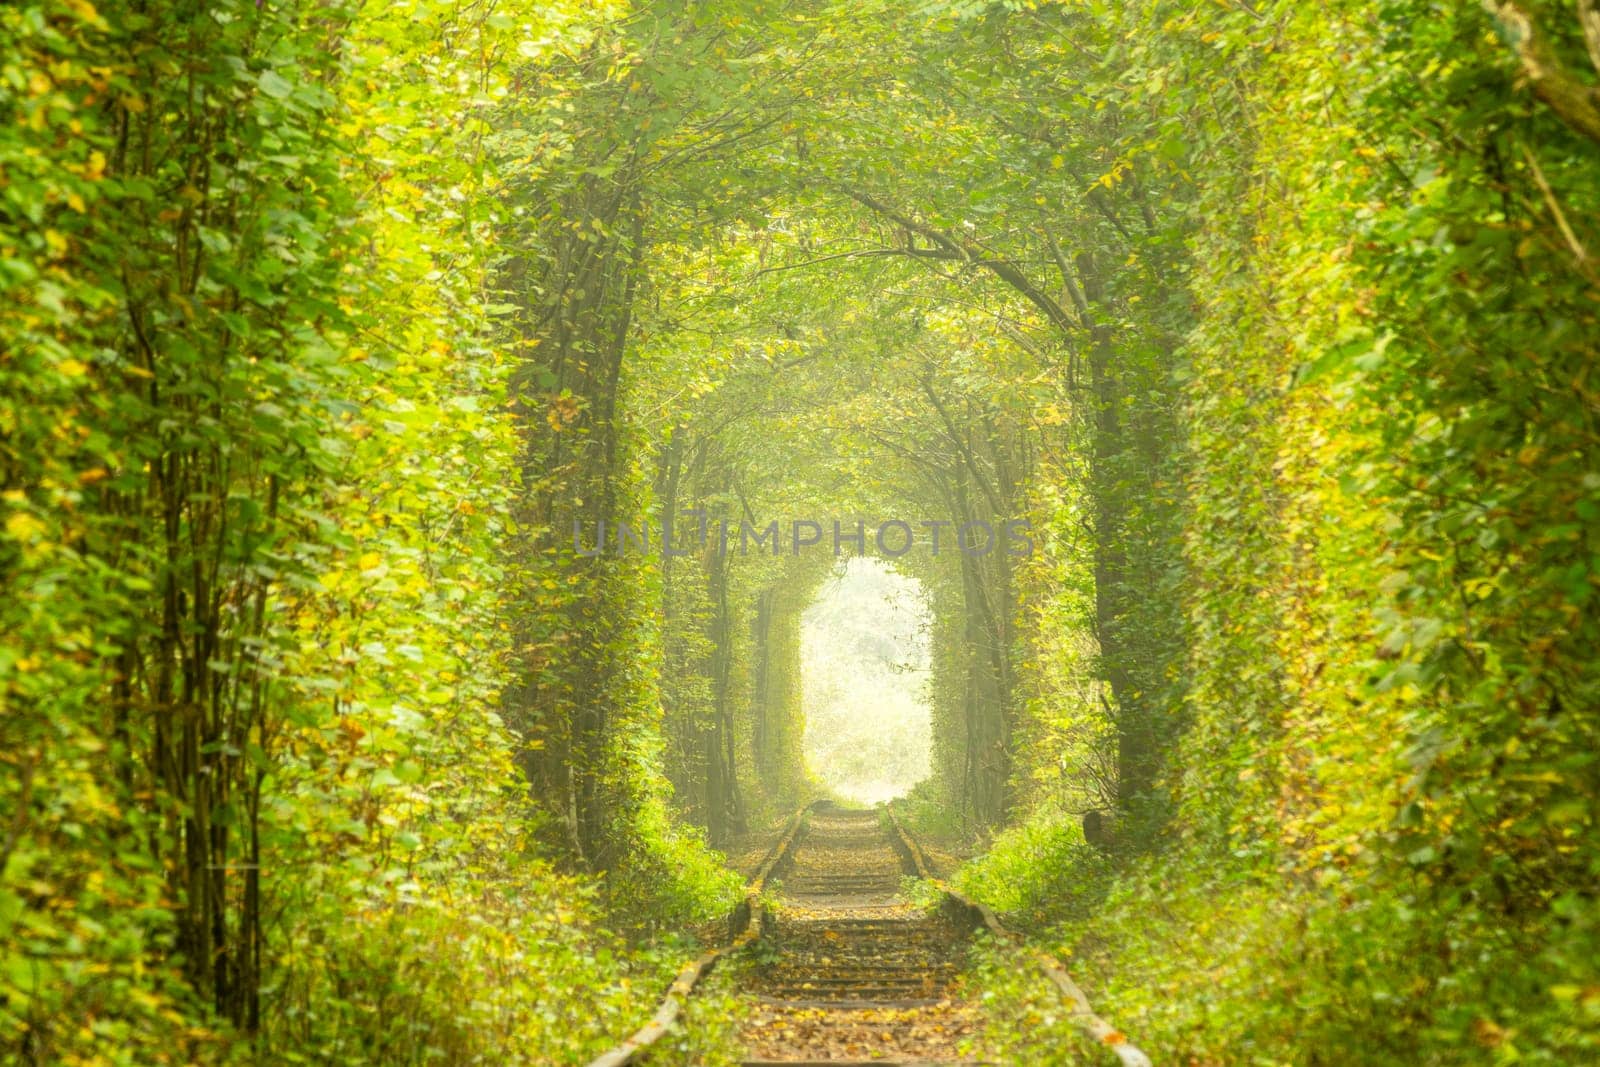 Sunny summer morning in the Rivne region of Ukraine. Tunnel of love in Klevan. Dense deciduous forest and old railroad tracks